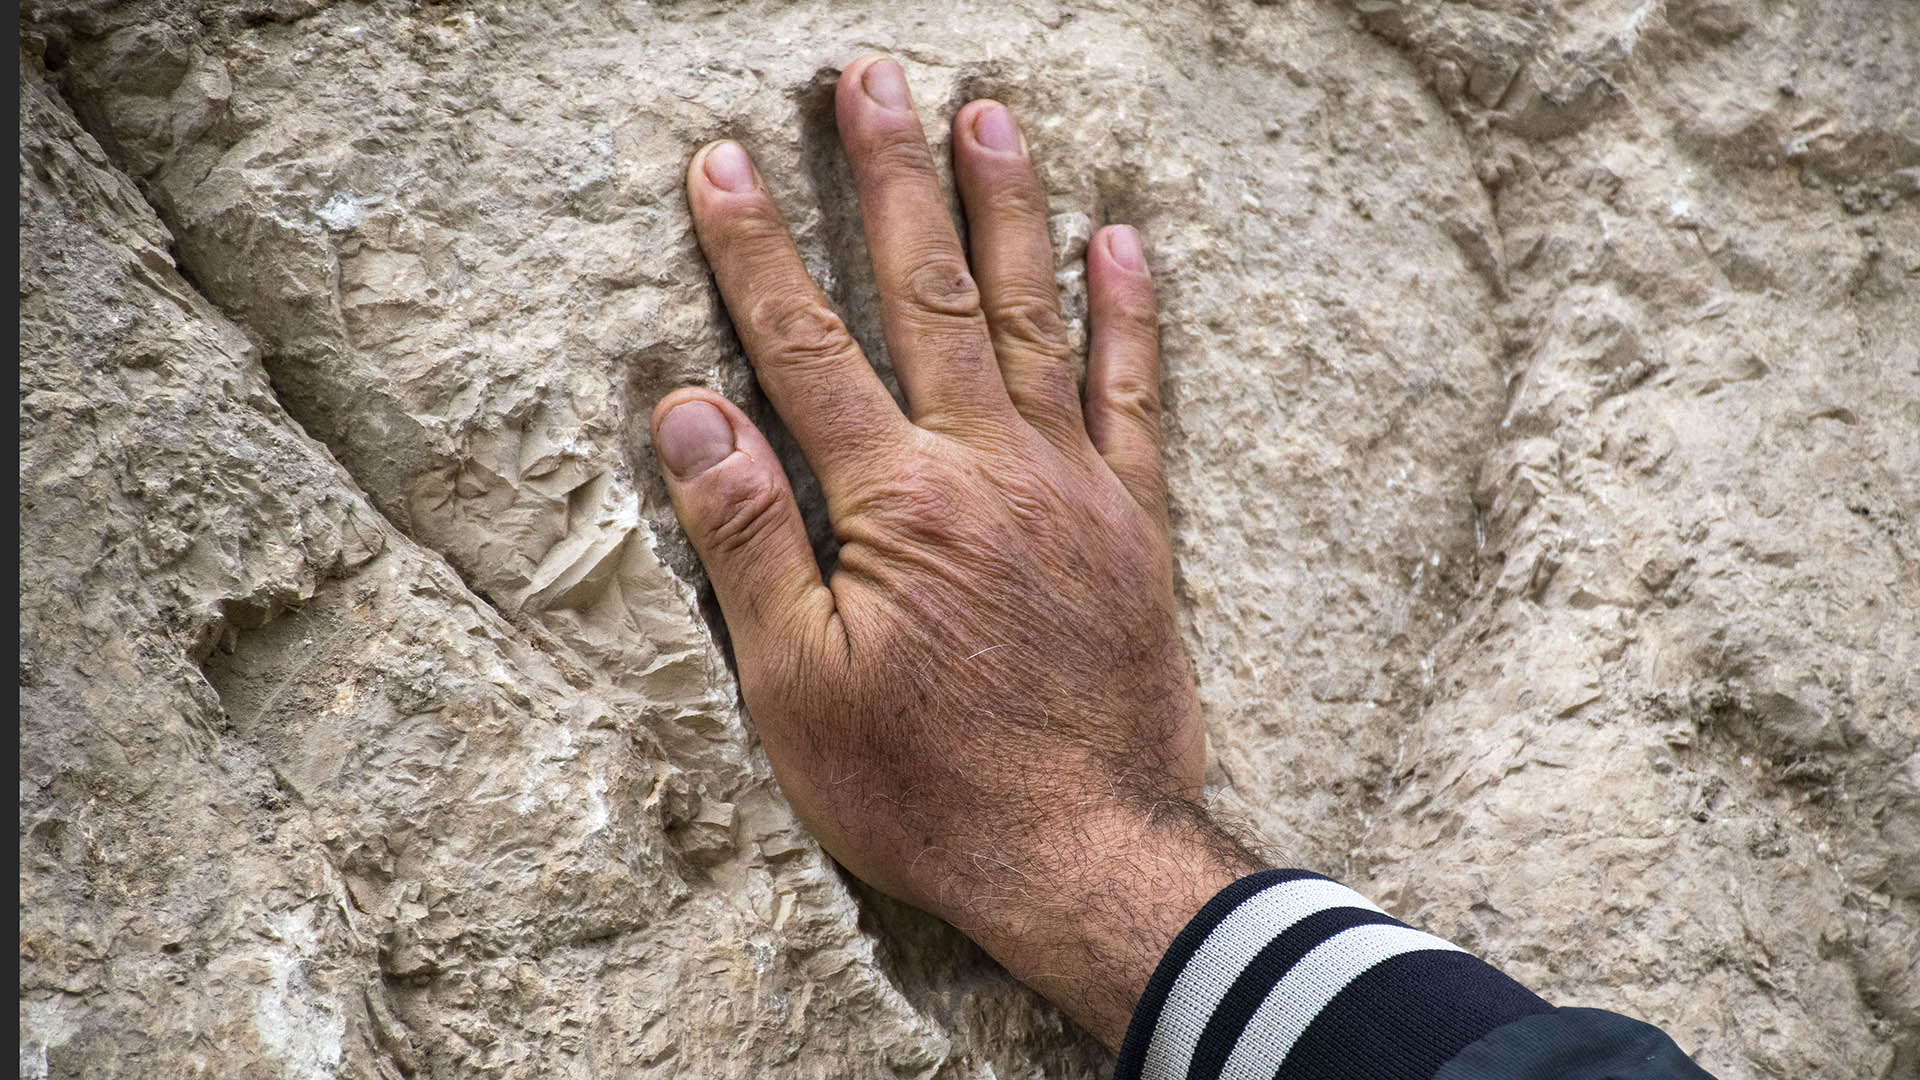 Image provided by the Israel Antiquities Authority on January 25, 2023 shows a man placing his hand in a palm print.  (Photo Israel Antiquities Authority / AFP)